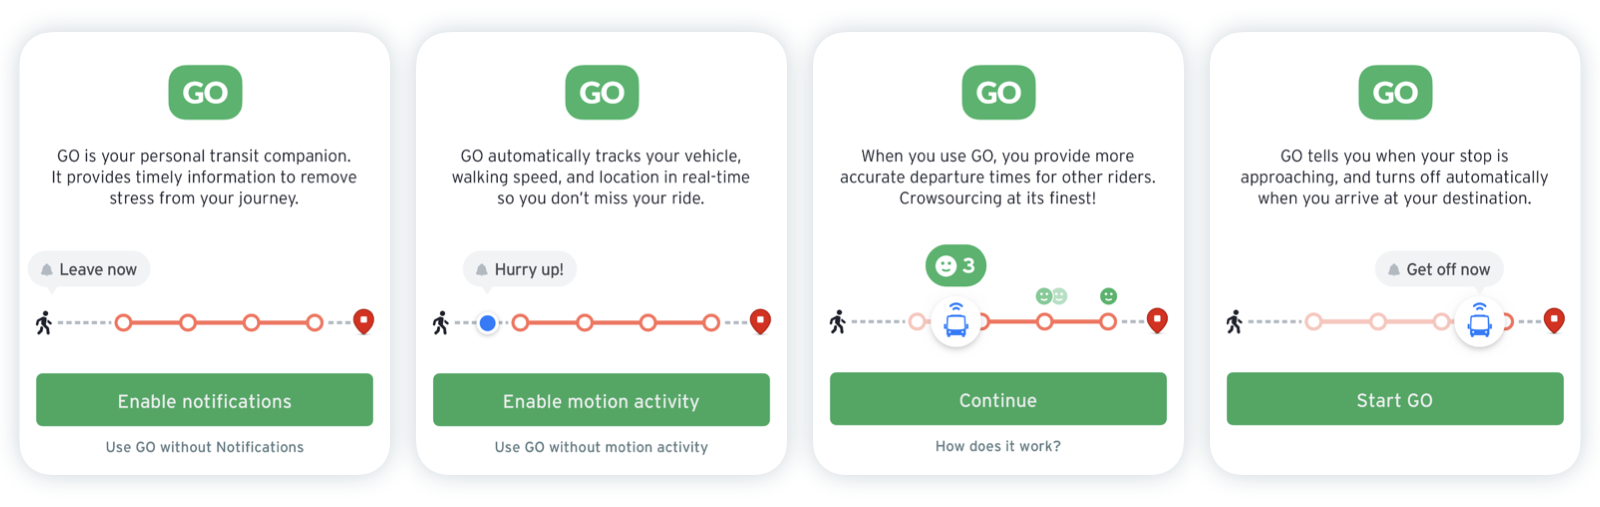 Transit App screenshot showing the "GO" function that provides step-by-step trip instructions